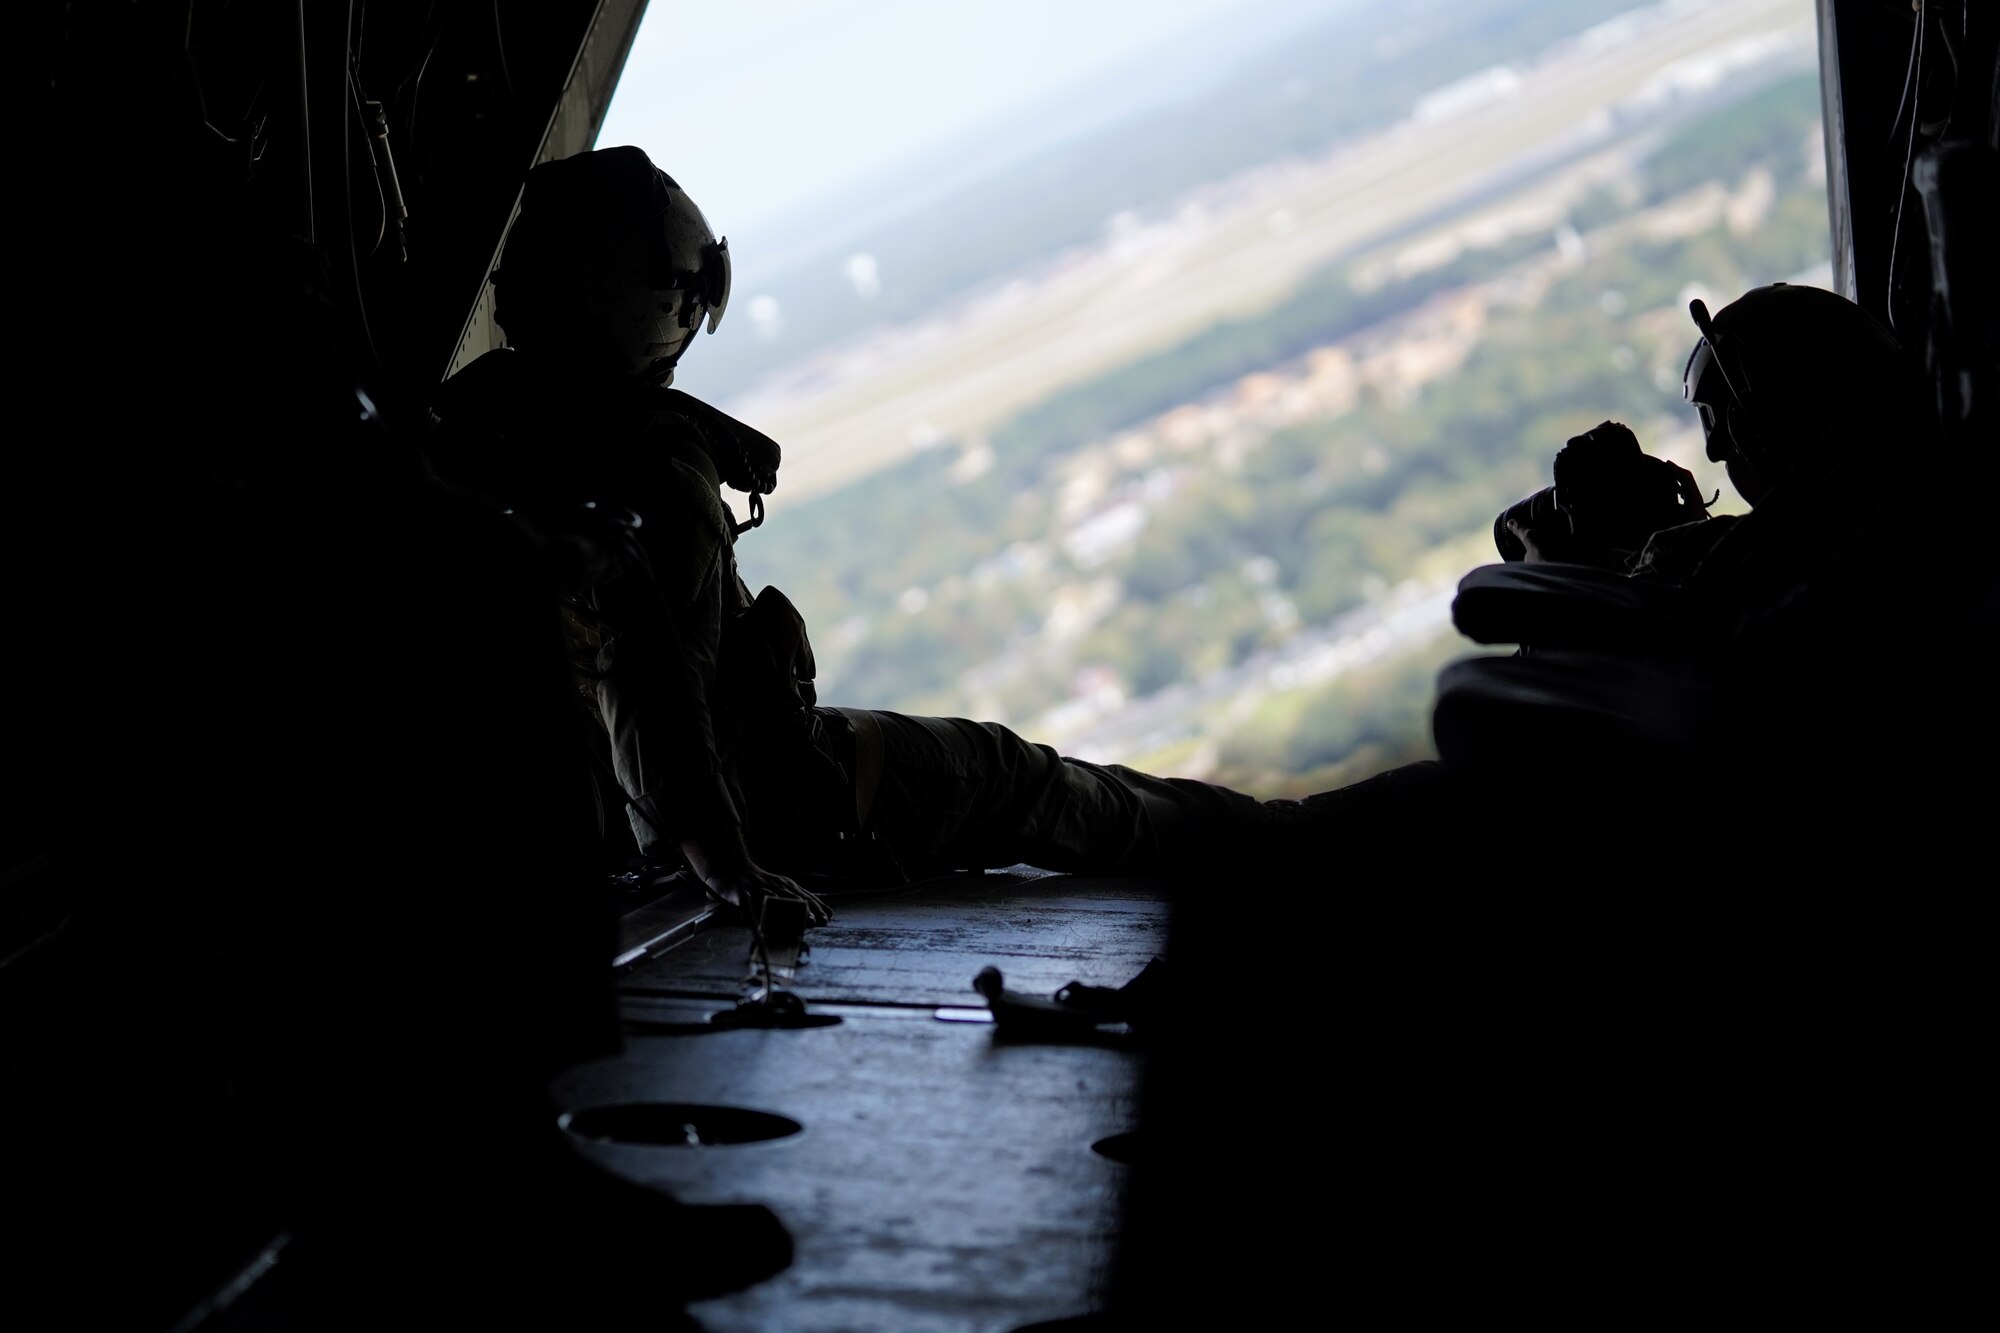 U.S. Marine Corps Staff Sgt. Jake Clark, Marine Medium Tiltrotor Squadron 774 MV-22B Osprey crew chief, Naval Air Station Norfolk, Virginia, sits on the back of a Osprey in a field in Columbia, Mississippi, Oct. 23, 2020. Marines came to Keesler to conduct routine training operations in and around the Mississippi area. (U.S. Air Force photo by Airman 1st Class Seth Haddix)